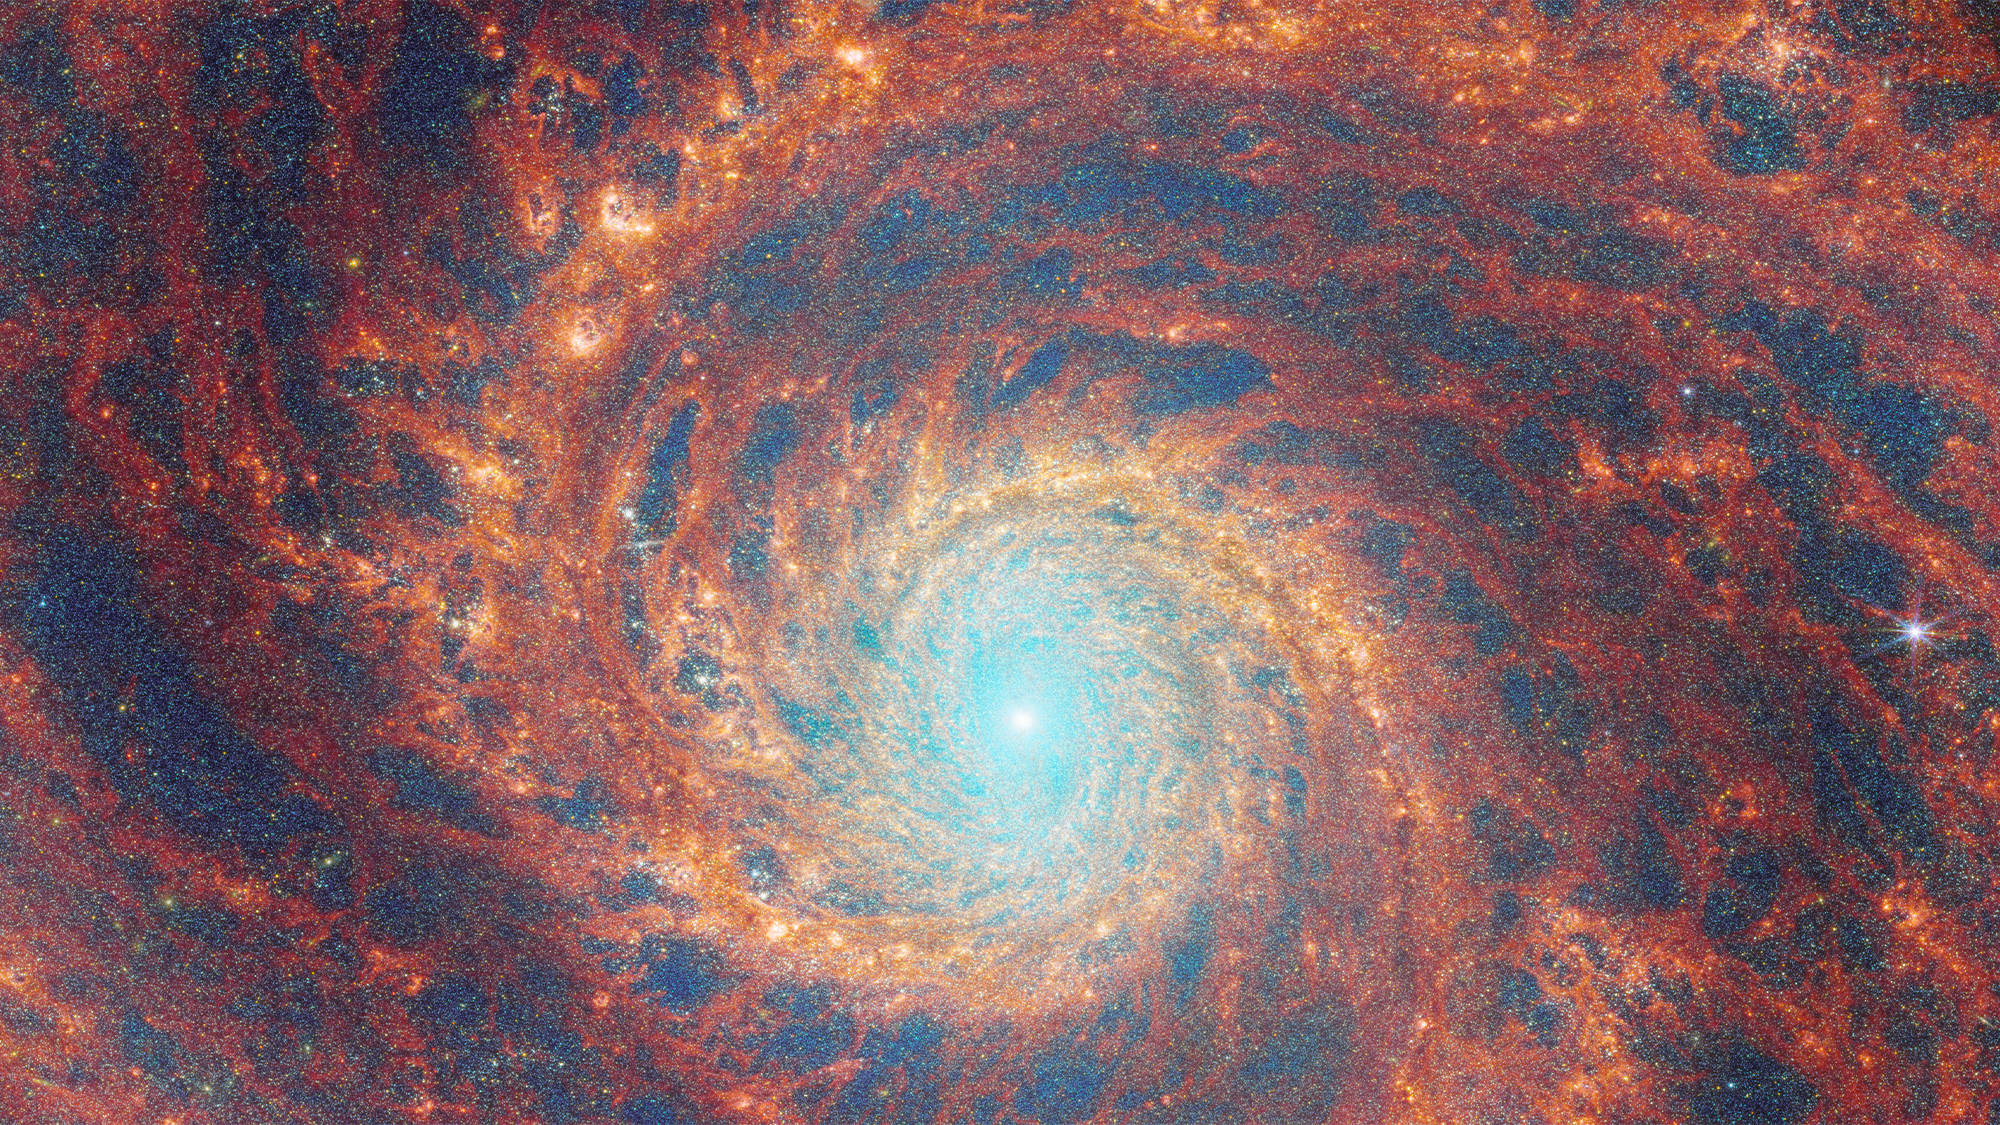 A large spiral galaxy takes up the entirety of the image. The core is mostly bright white, but there are also swirling, detailed structures that resemble water circling a drain. There is white and pale blue light that emanates from stars and dust at the core’s center, but it is tightly limited to the core. The rings feature colors of deep red and orange and highlight filaments of dust around cavernous black bubbles.